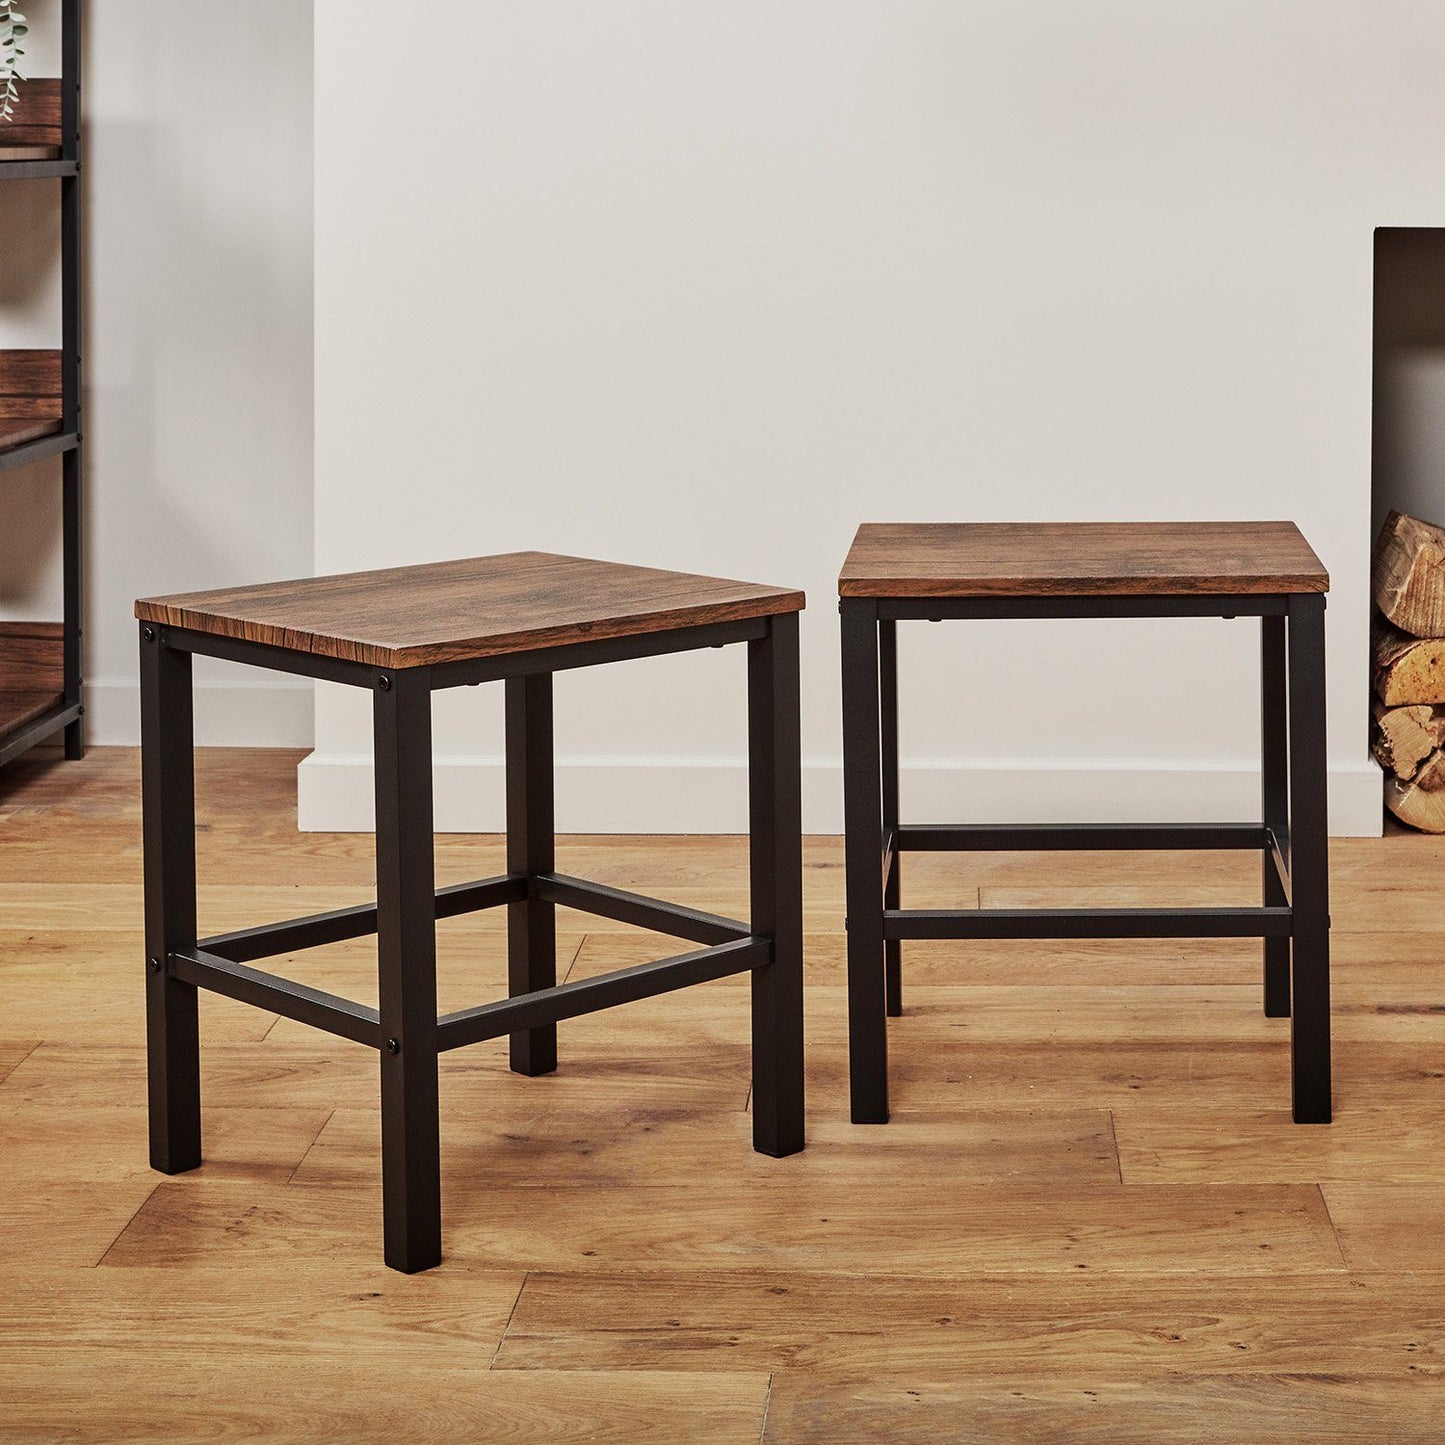 Sheffield dining table set – 6 seater – 6 stools - Laura James